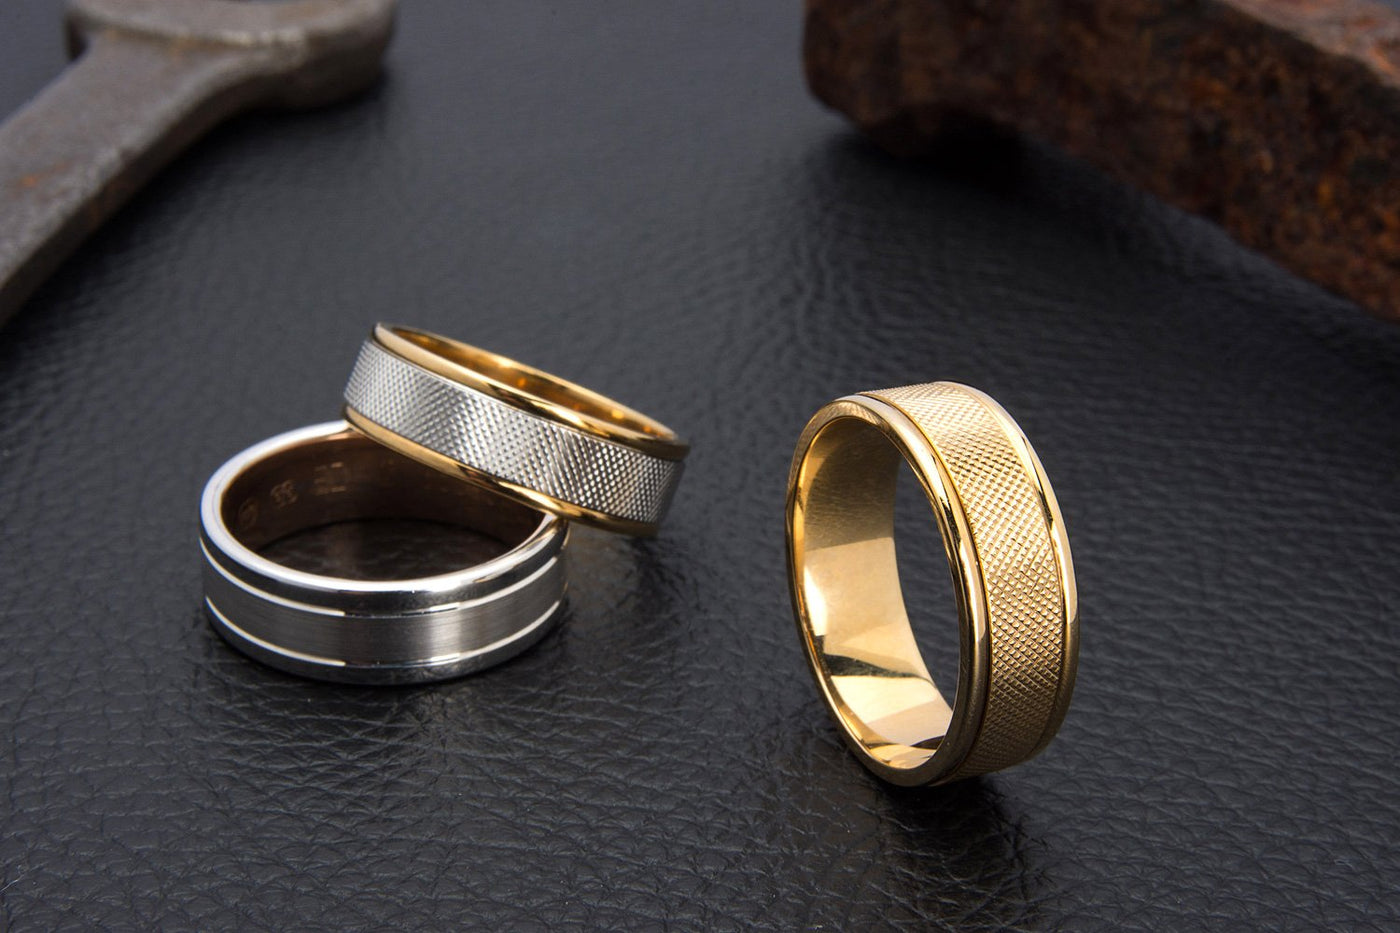 Textured Two Tone Gold Mens Wedding Ring - 2TJ4226